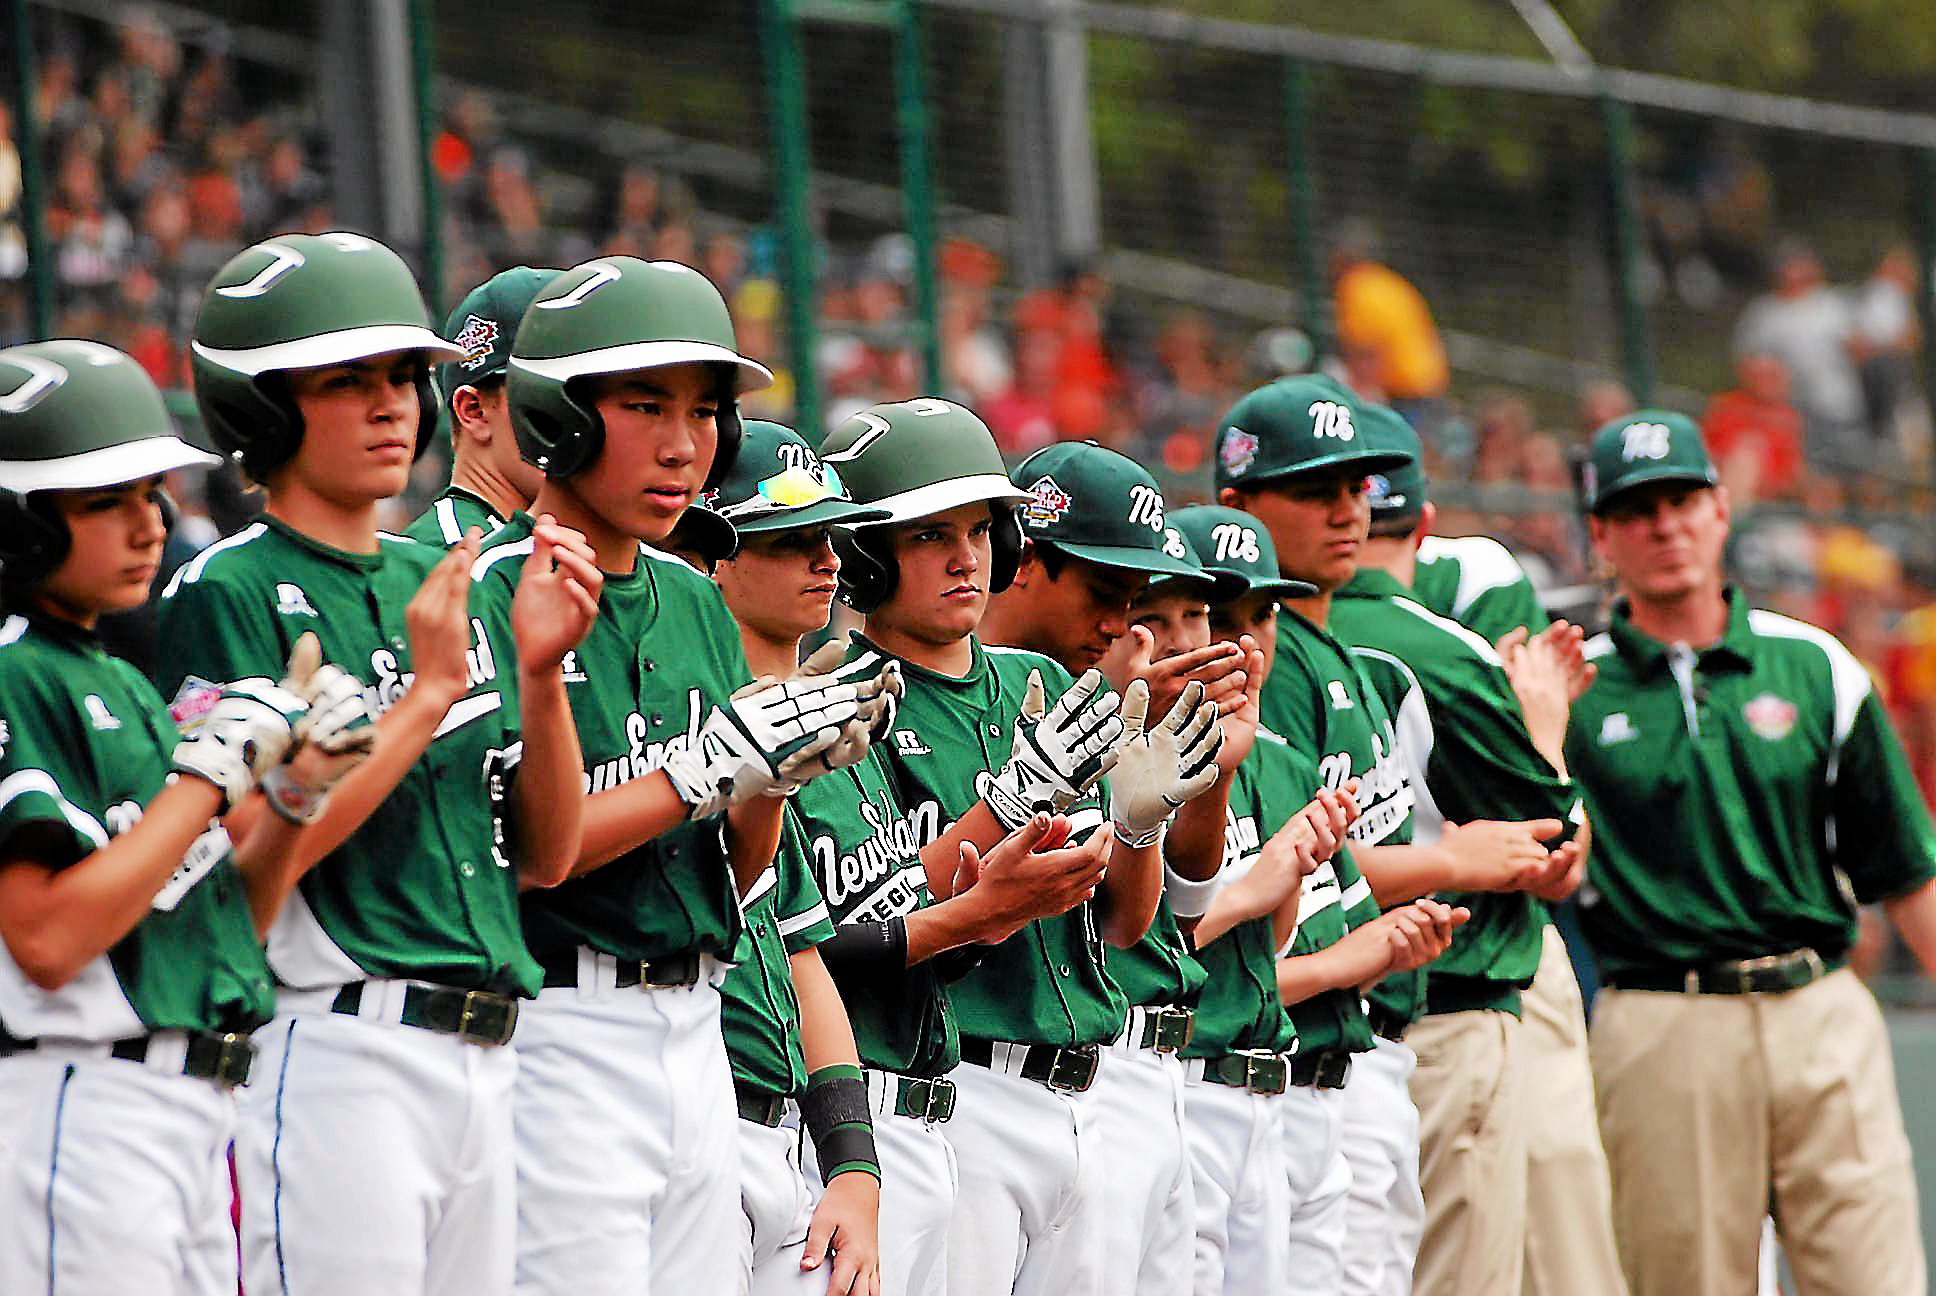 Chris Drury's Trumbull Little League team to be honored